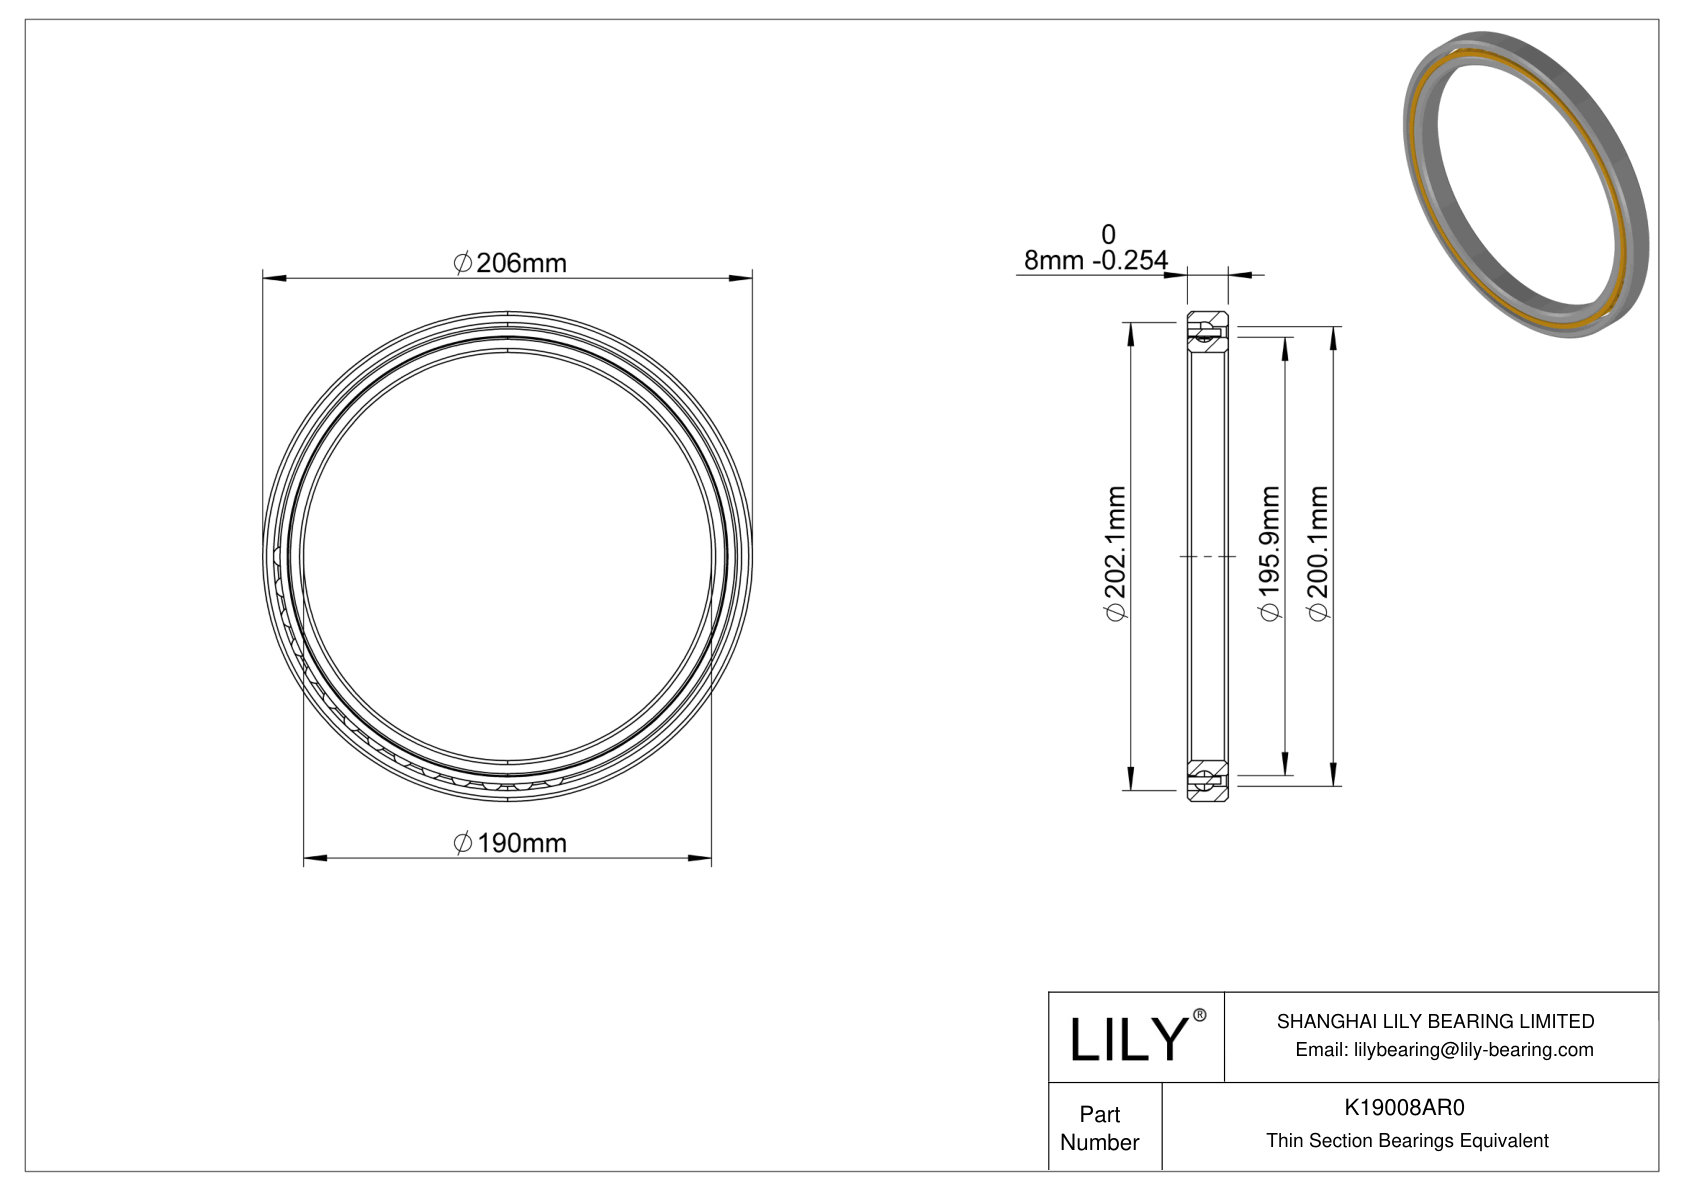 K19008AR0 Constant Section (CS) Bearings cad drawing